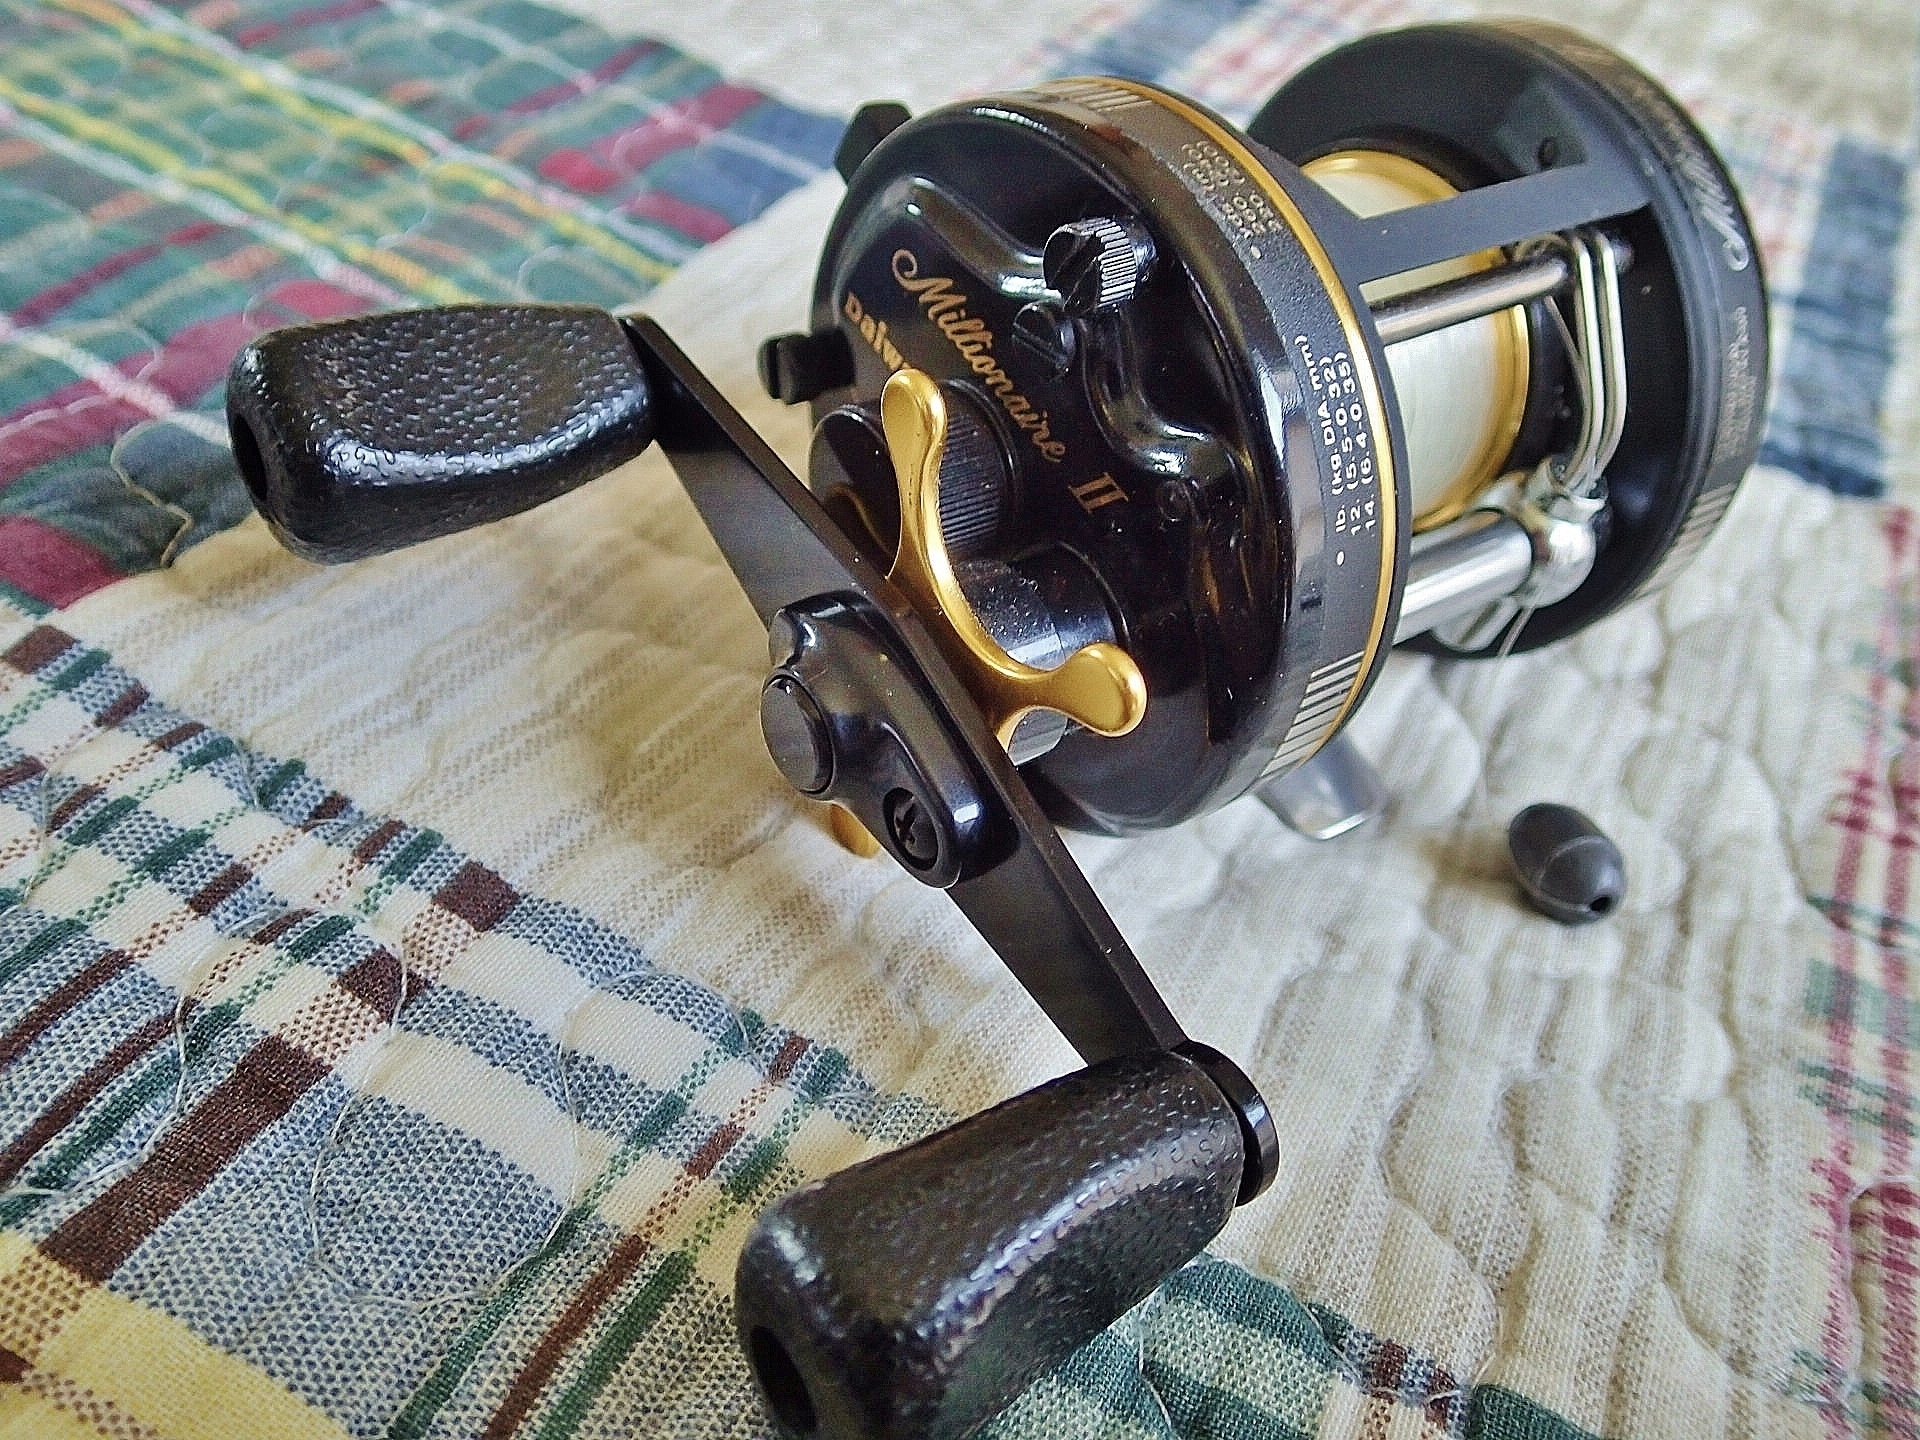 Inside the Daiwa Millionaire 5H--noting differences with similar Abus